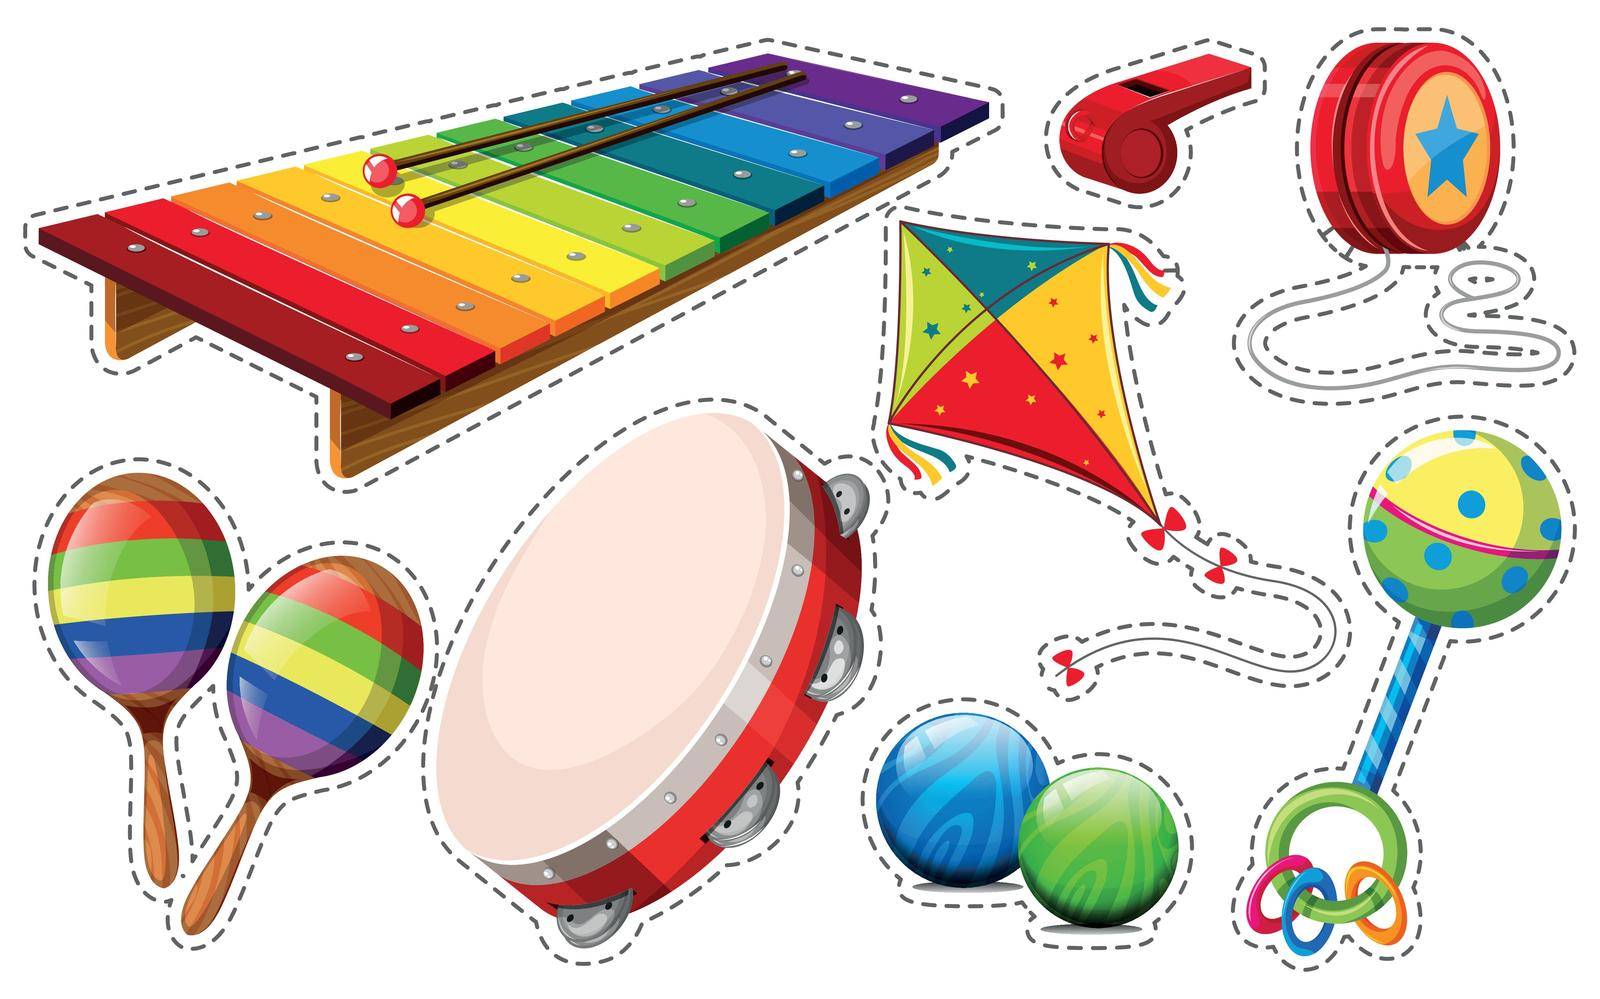 Sticker set of musical instrument and toys by iimages